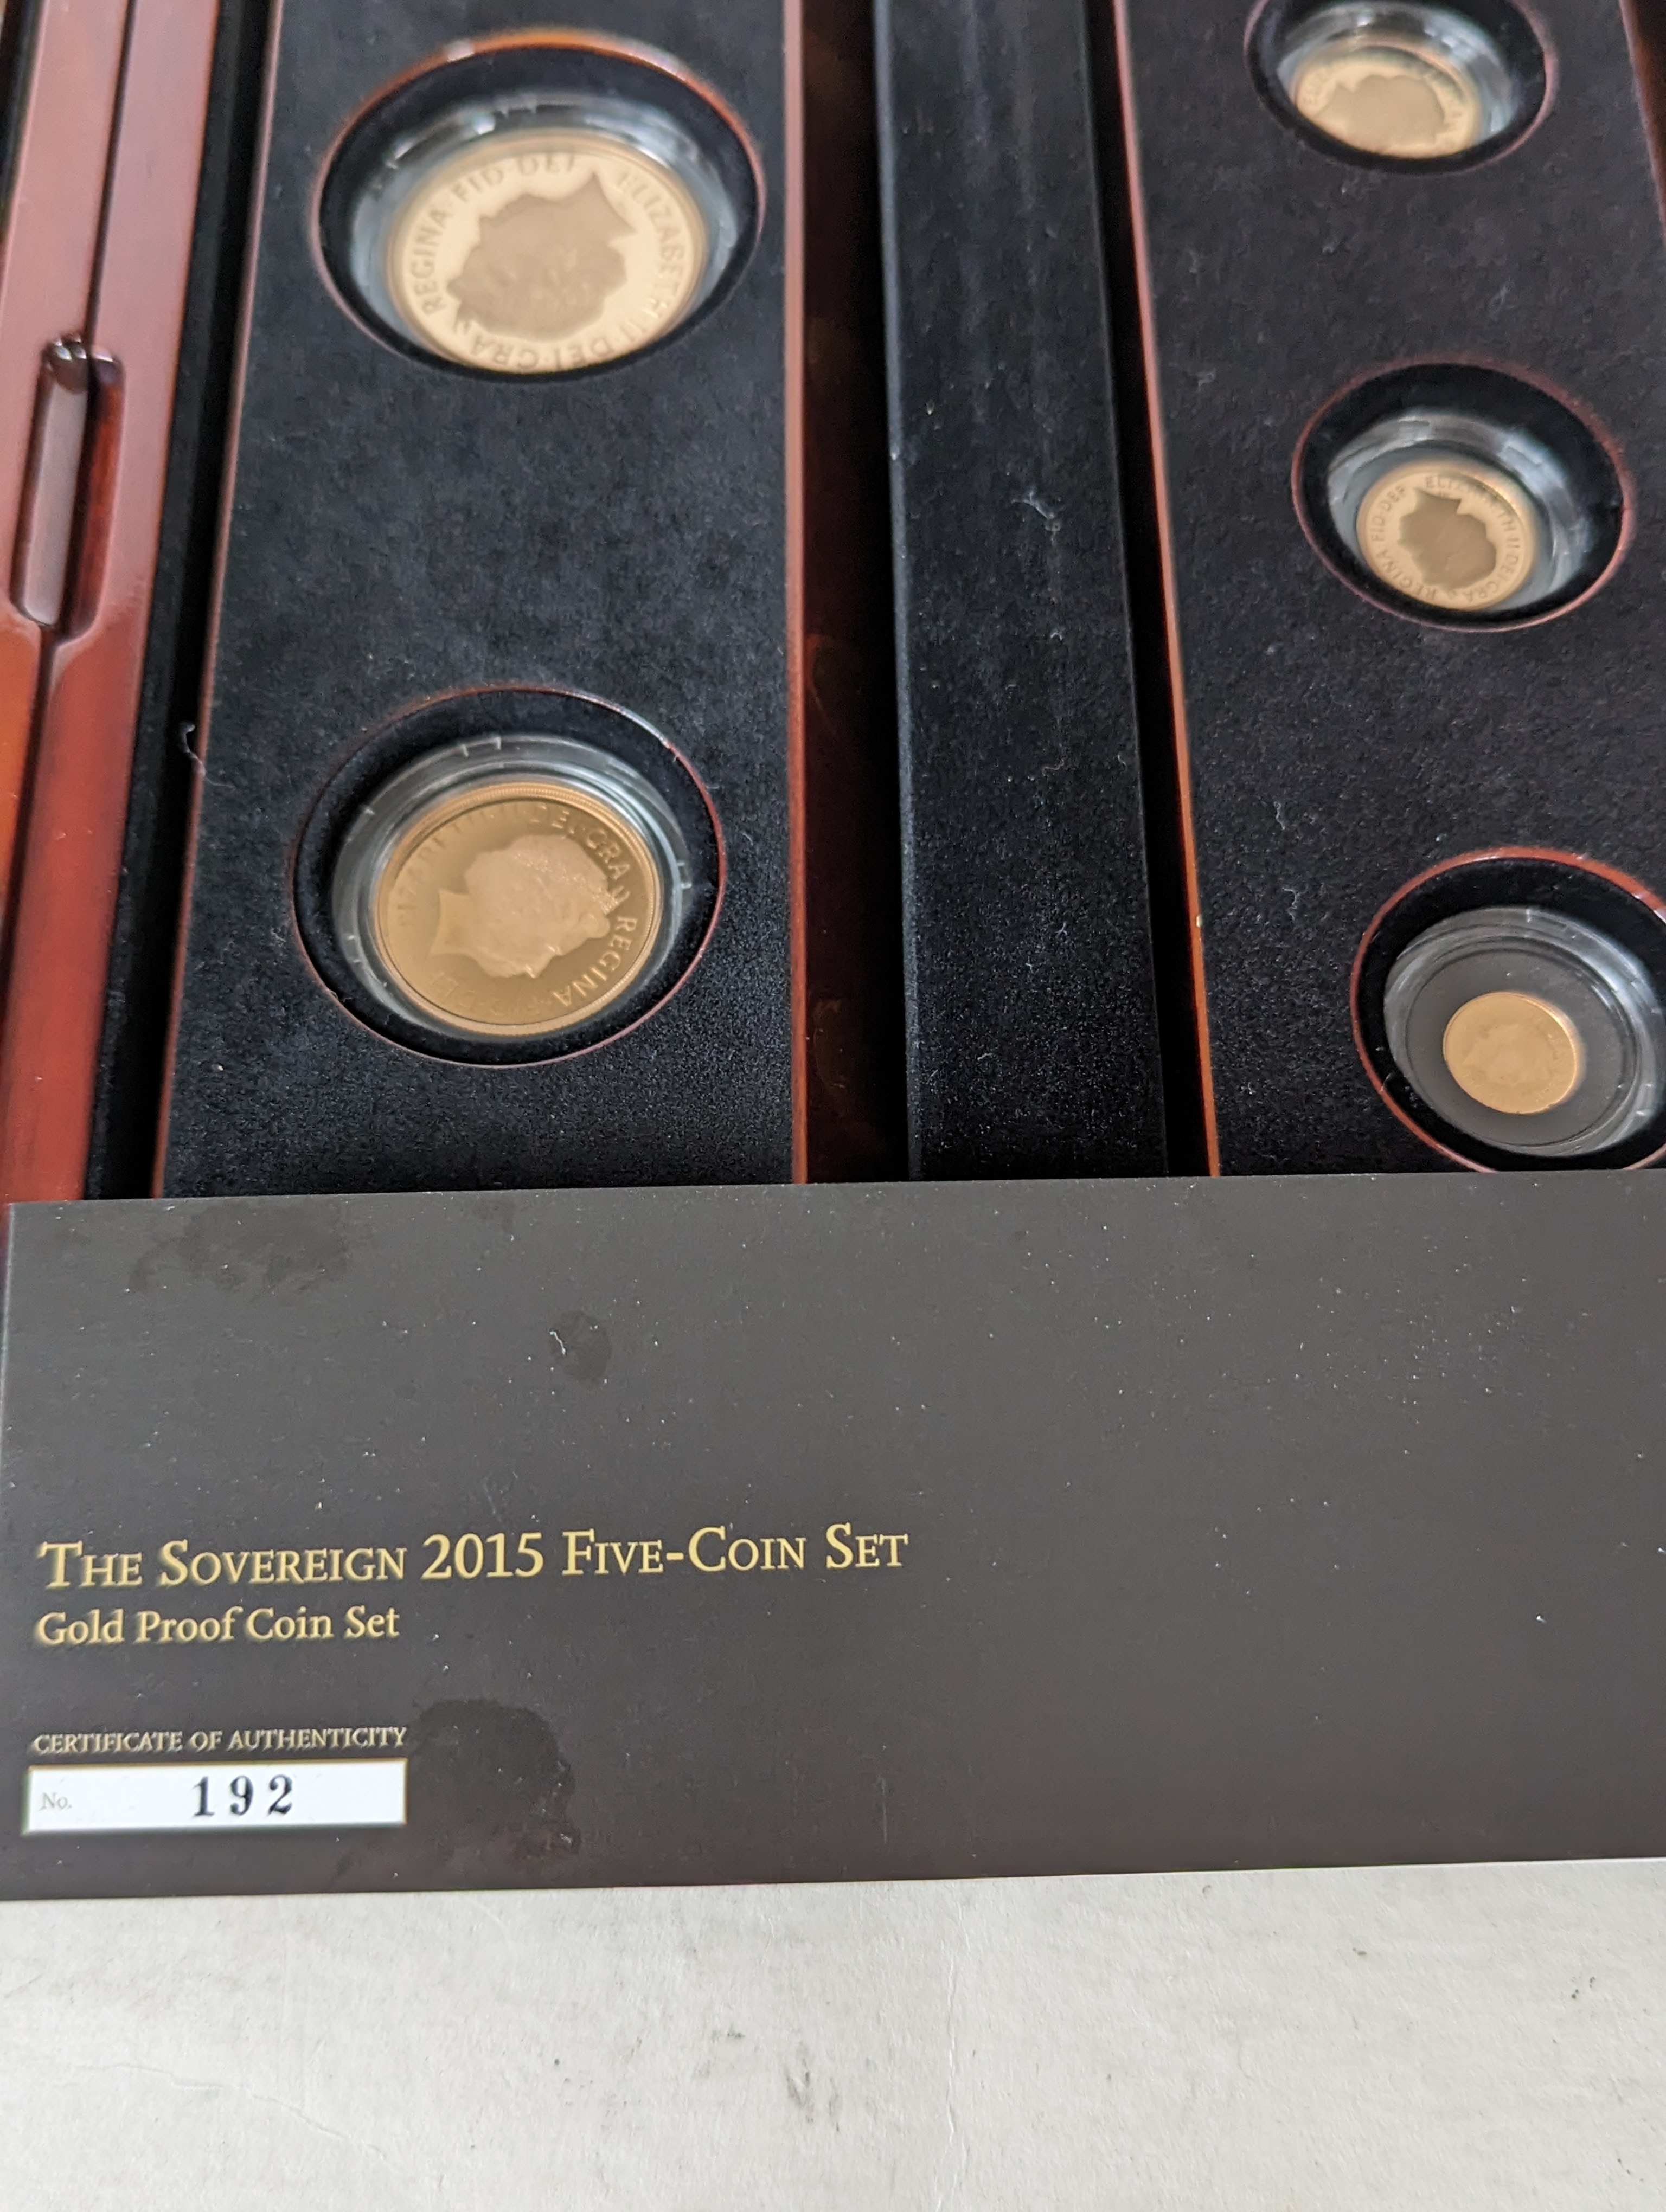 The Royal Mint 2015 Five Coin Gold Proof Sovereign Coin Set, Fifth Portrait, First Edition, Limited  - Image 2 of 8